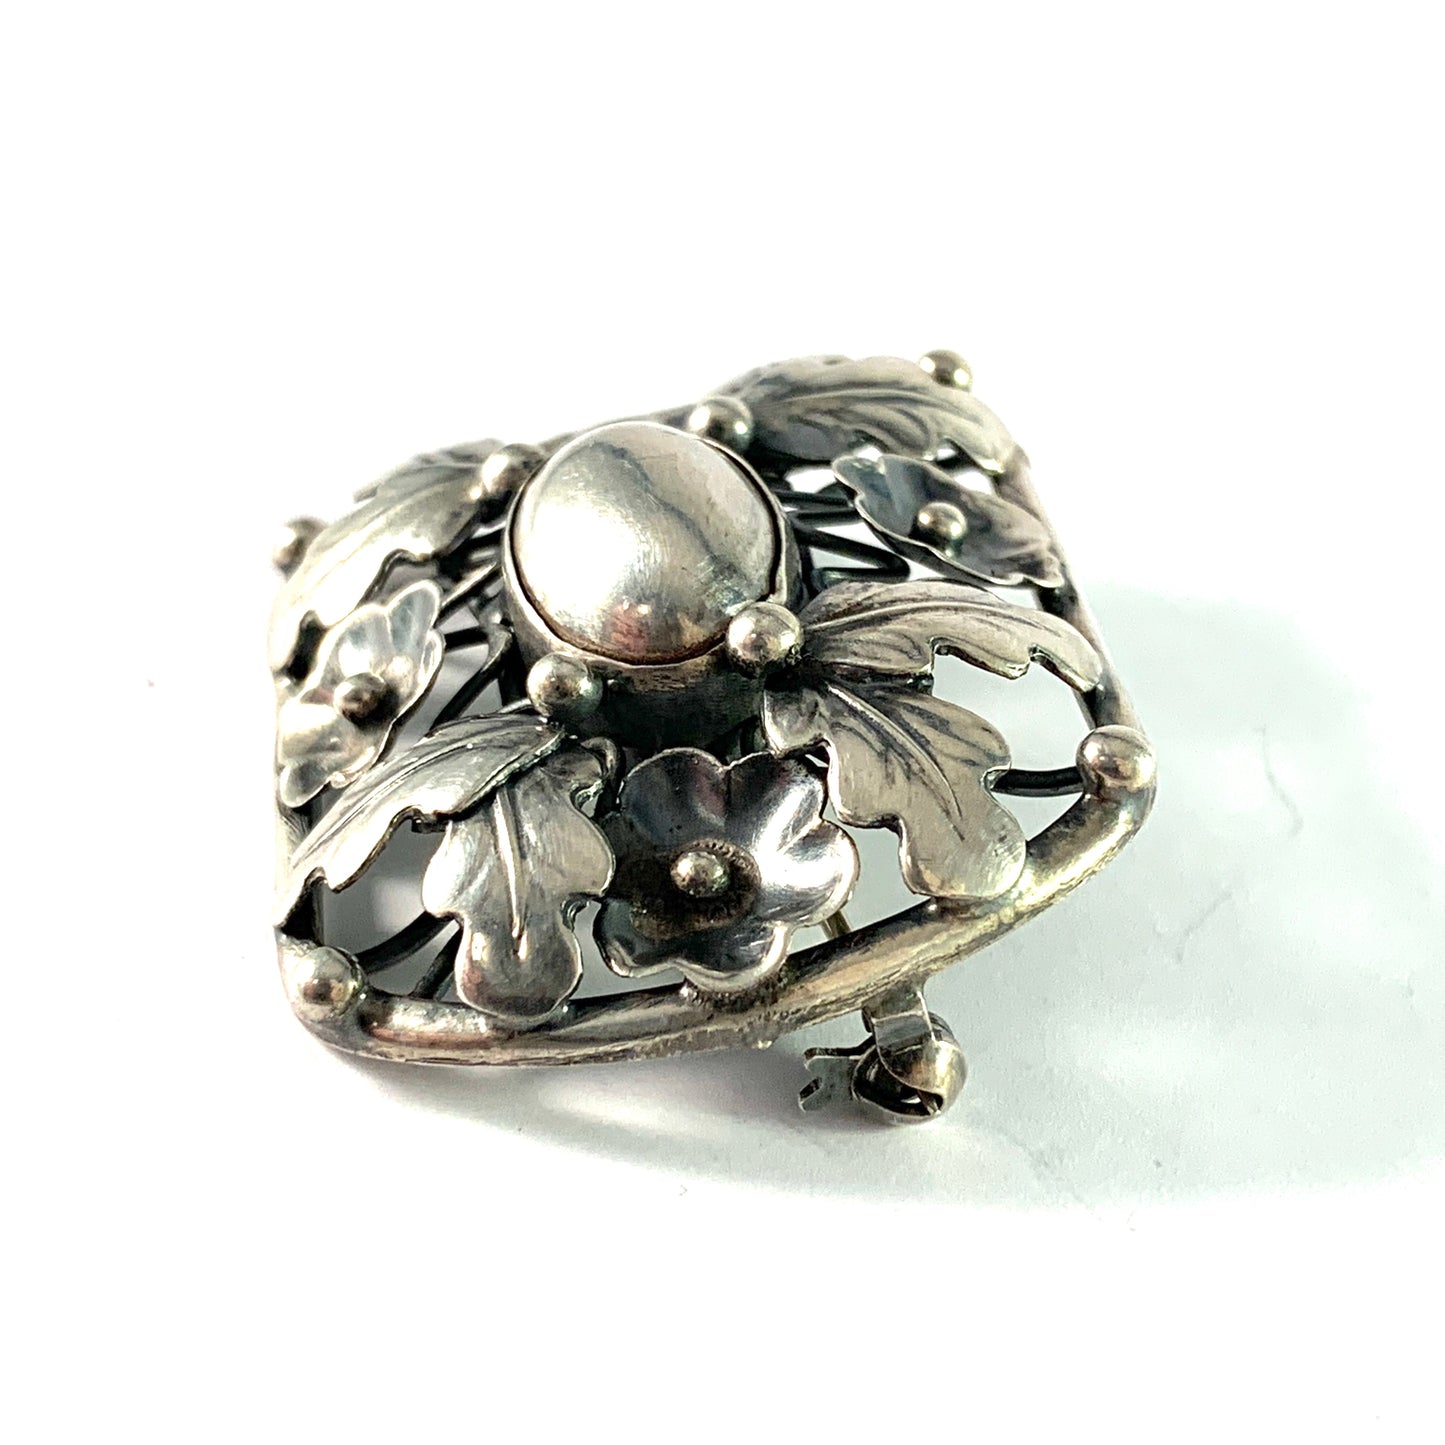 Gussi, Sweden 1951 Mid Century Sterling Silver Brooch.